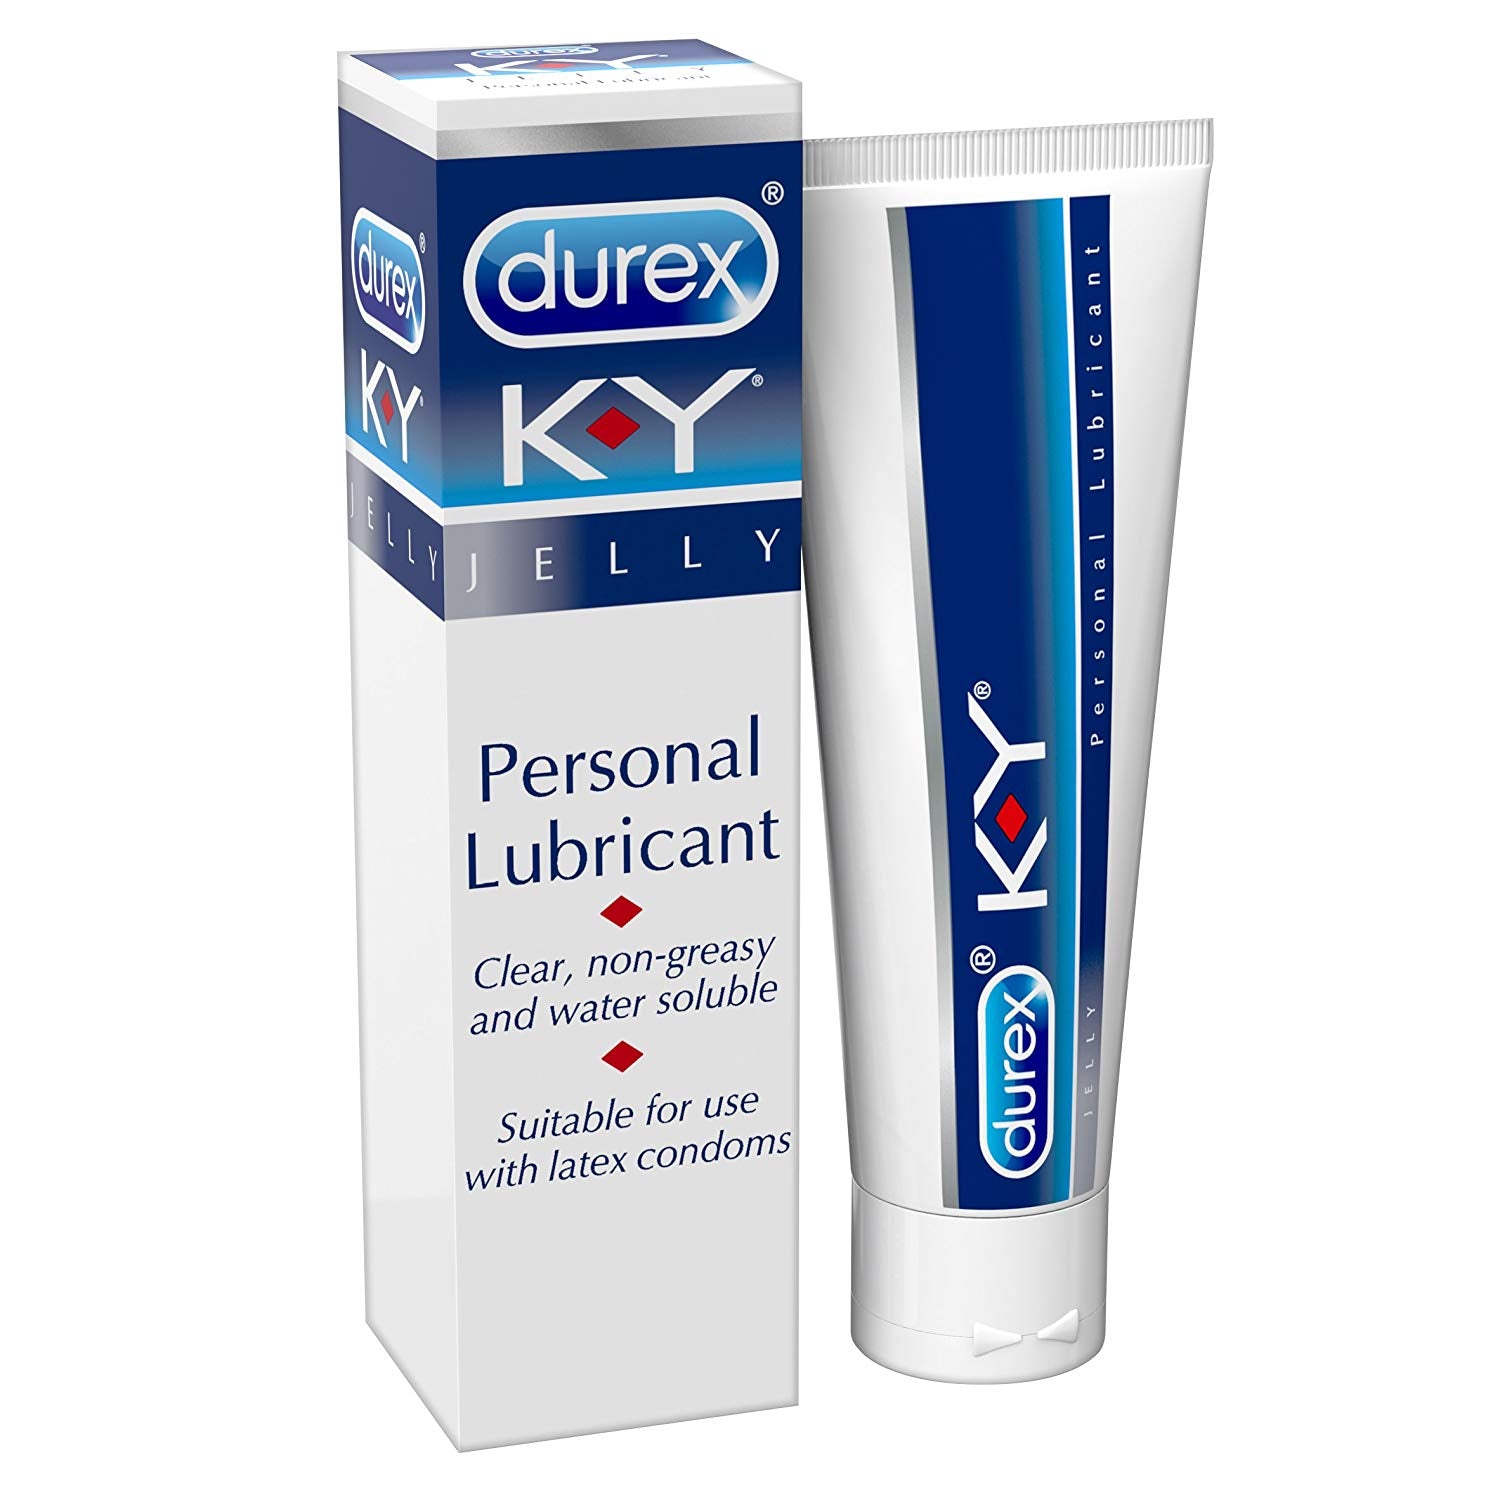 Durex K-Y Jelly - Personal Lubricant - 50 gram Tube - Early2bed